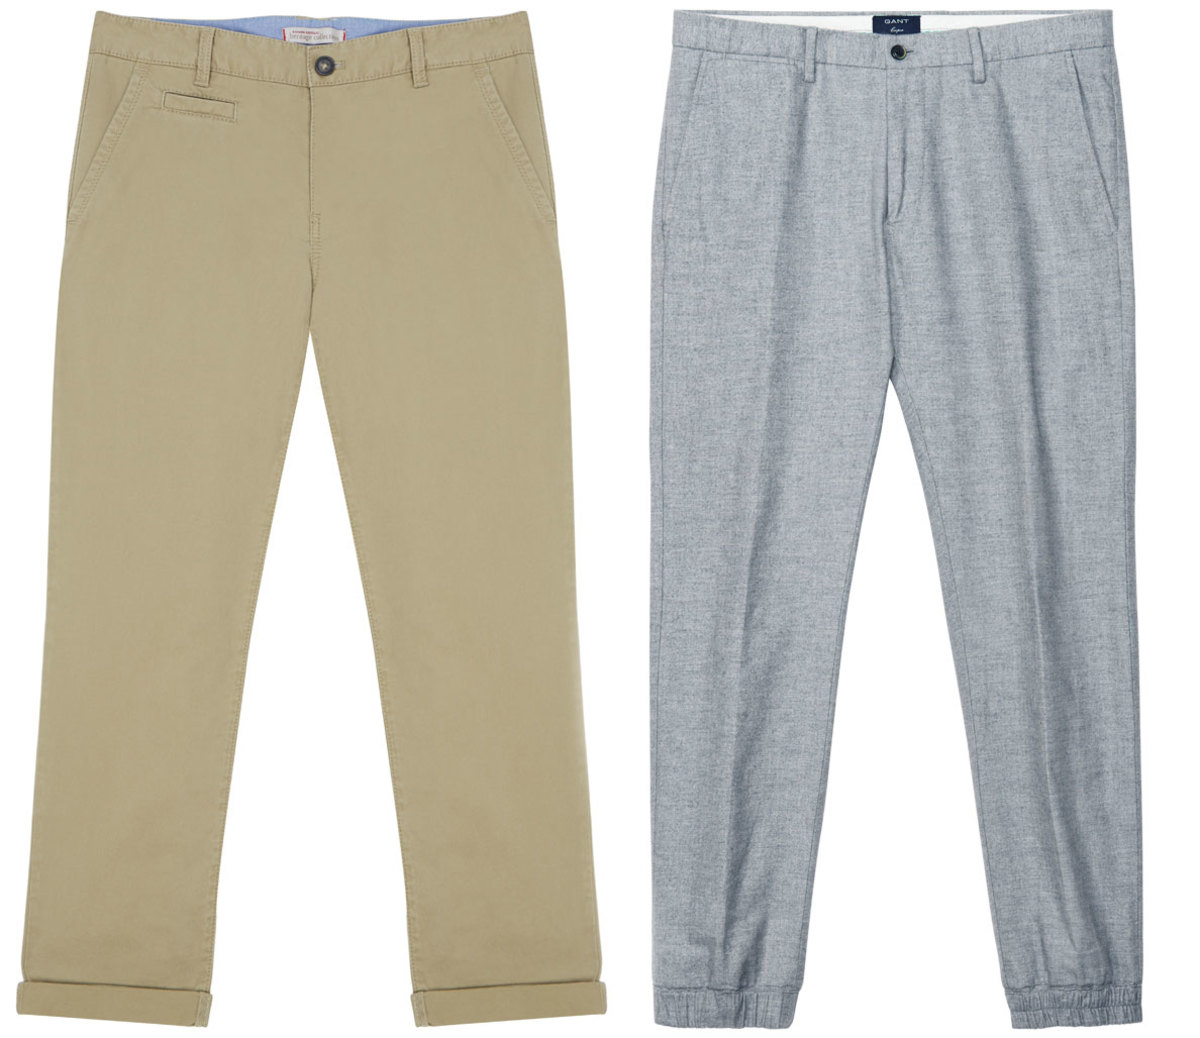 Jeans, Pants and Trousers for Men